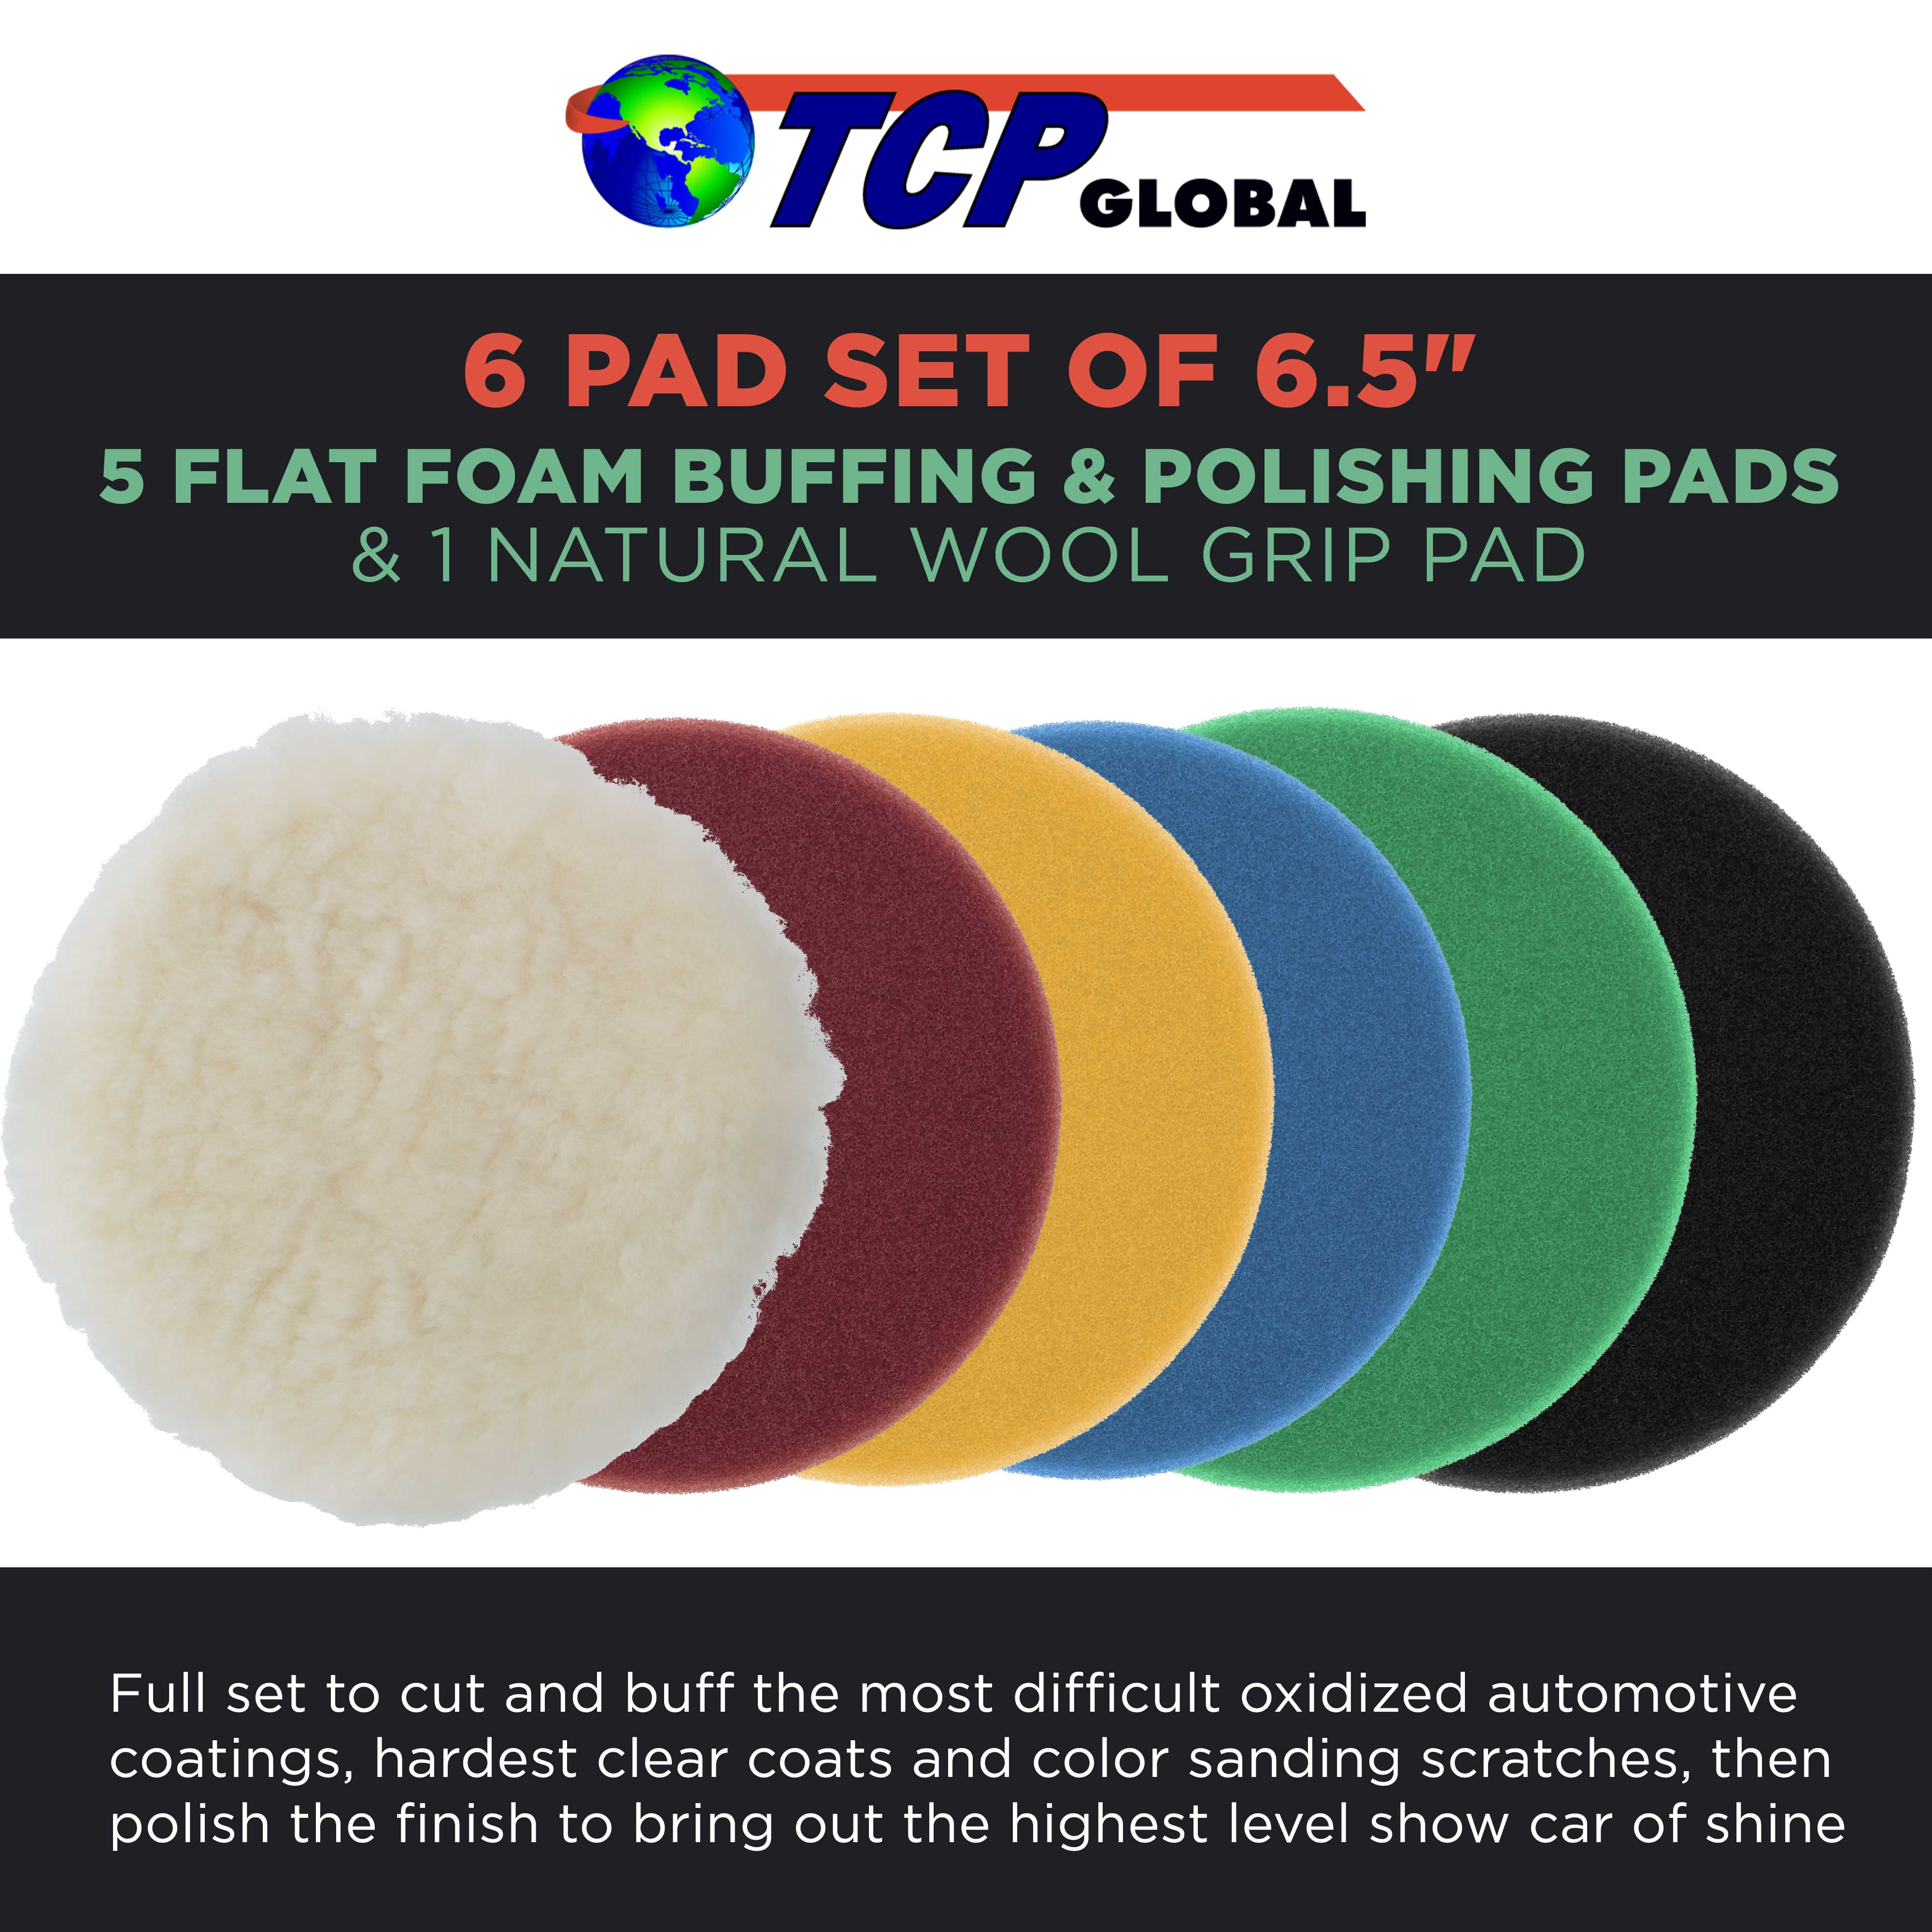 Buff and Shine 6 in. Flat Foam Pads 6 Pack - YOUR CHOICE